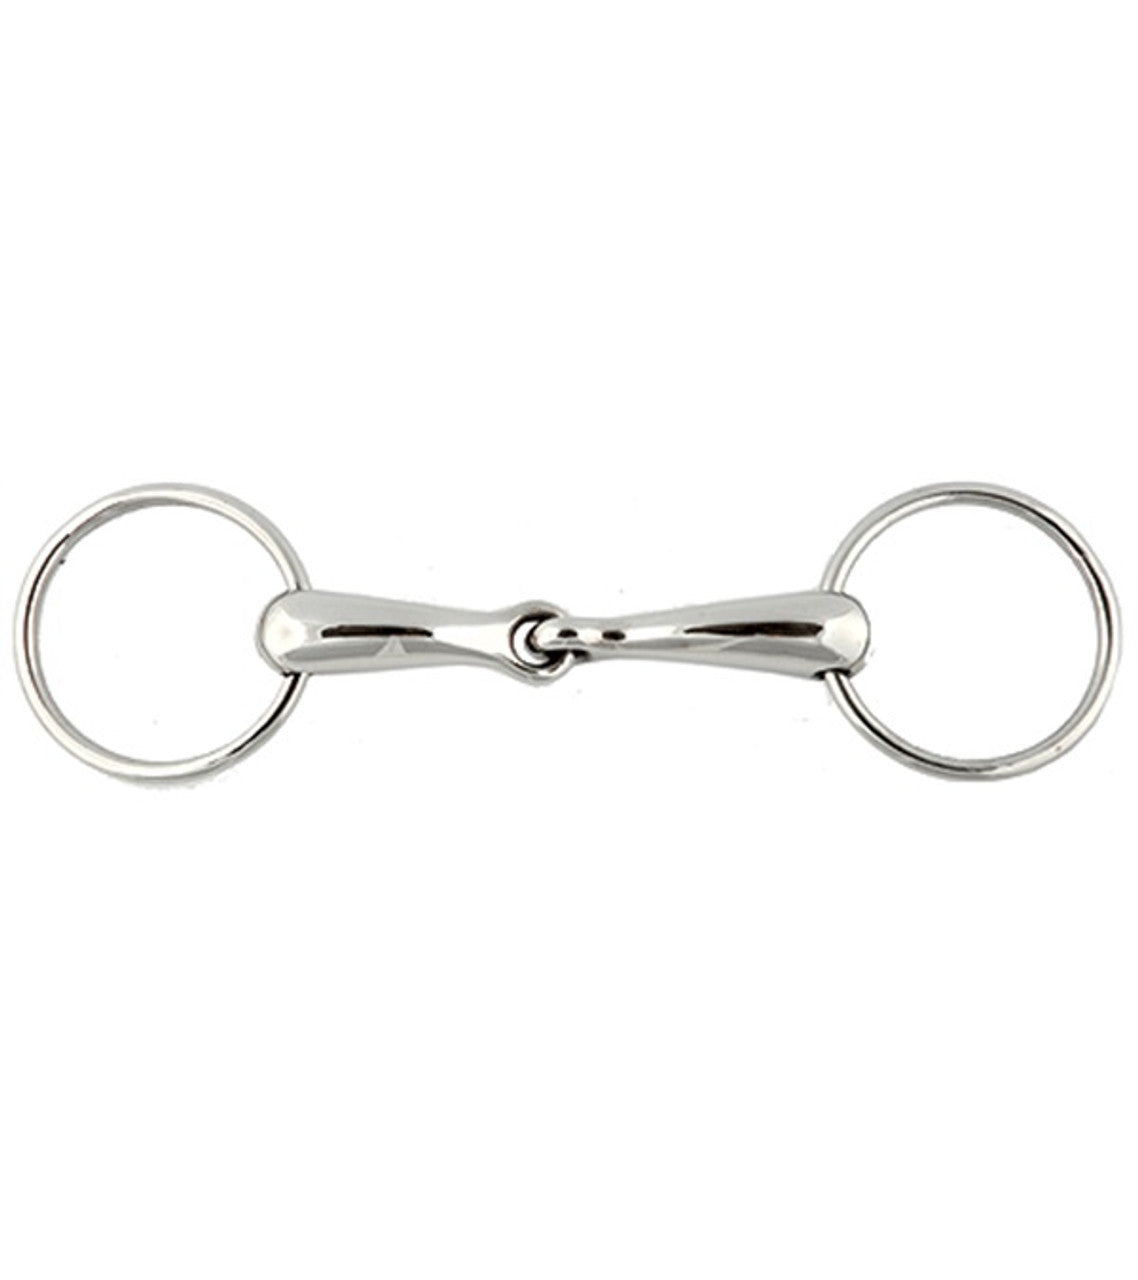 Stainless Steel Loose Ring Snaffle Bit 21mm Thick-TexanSaddles.com